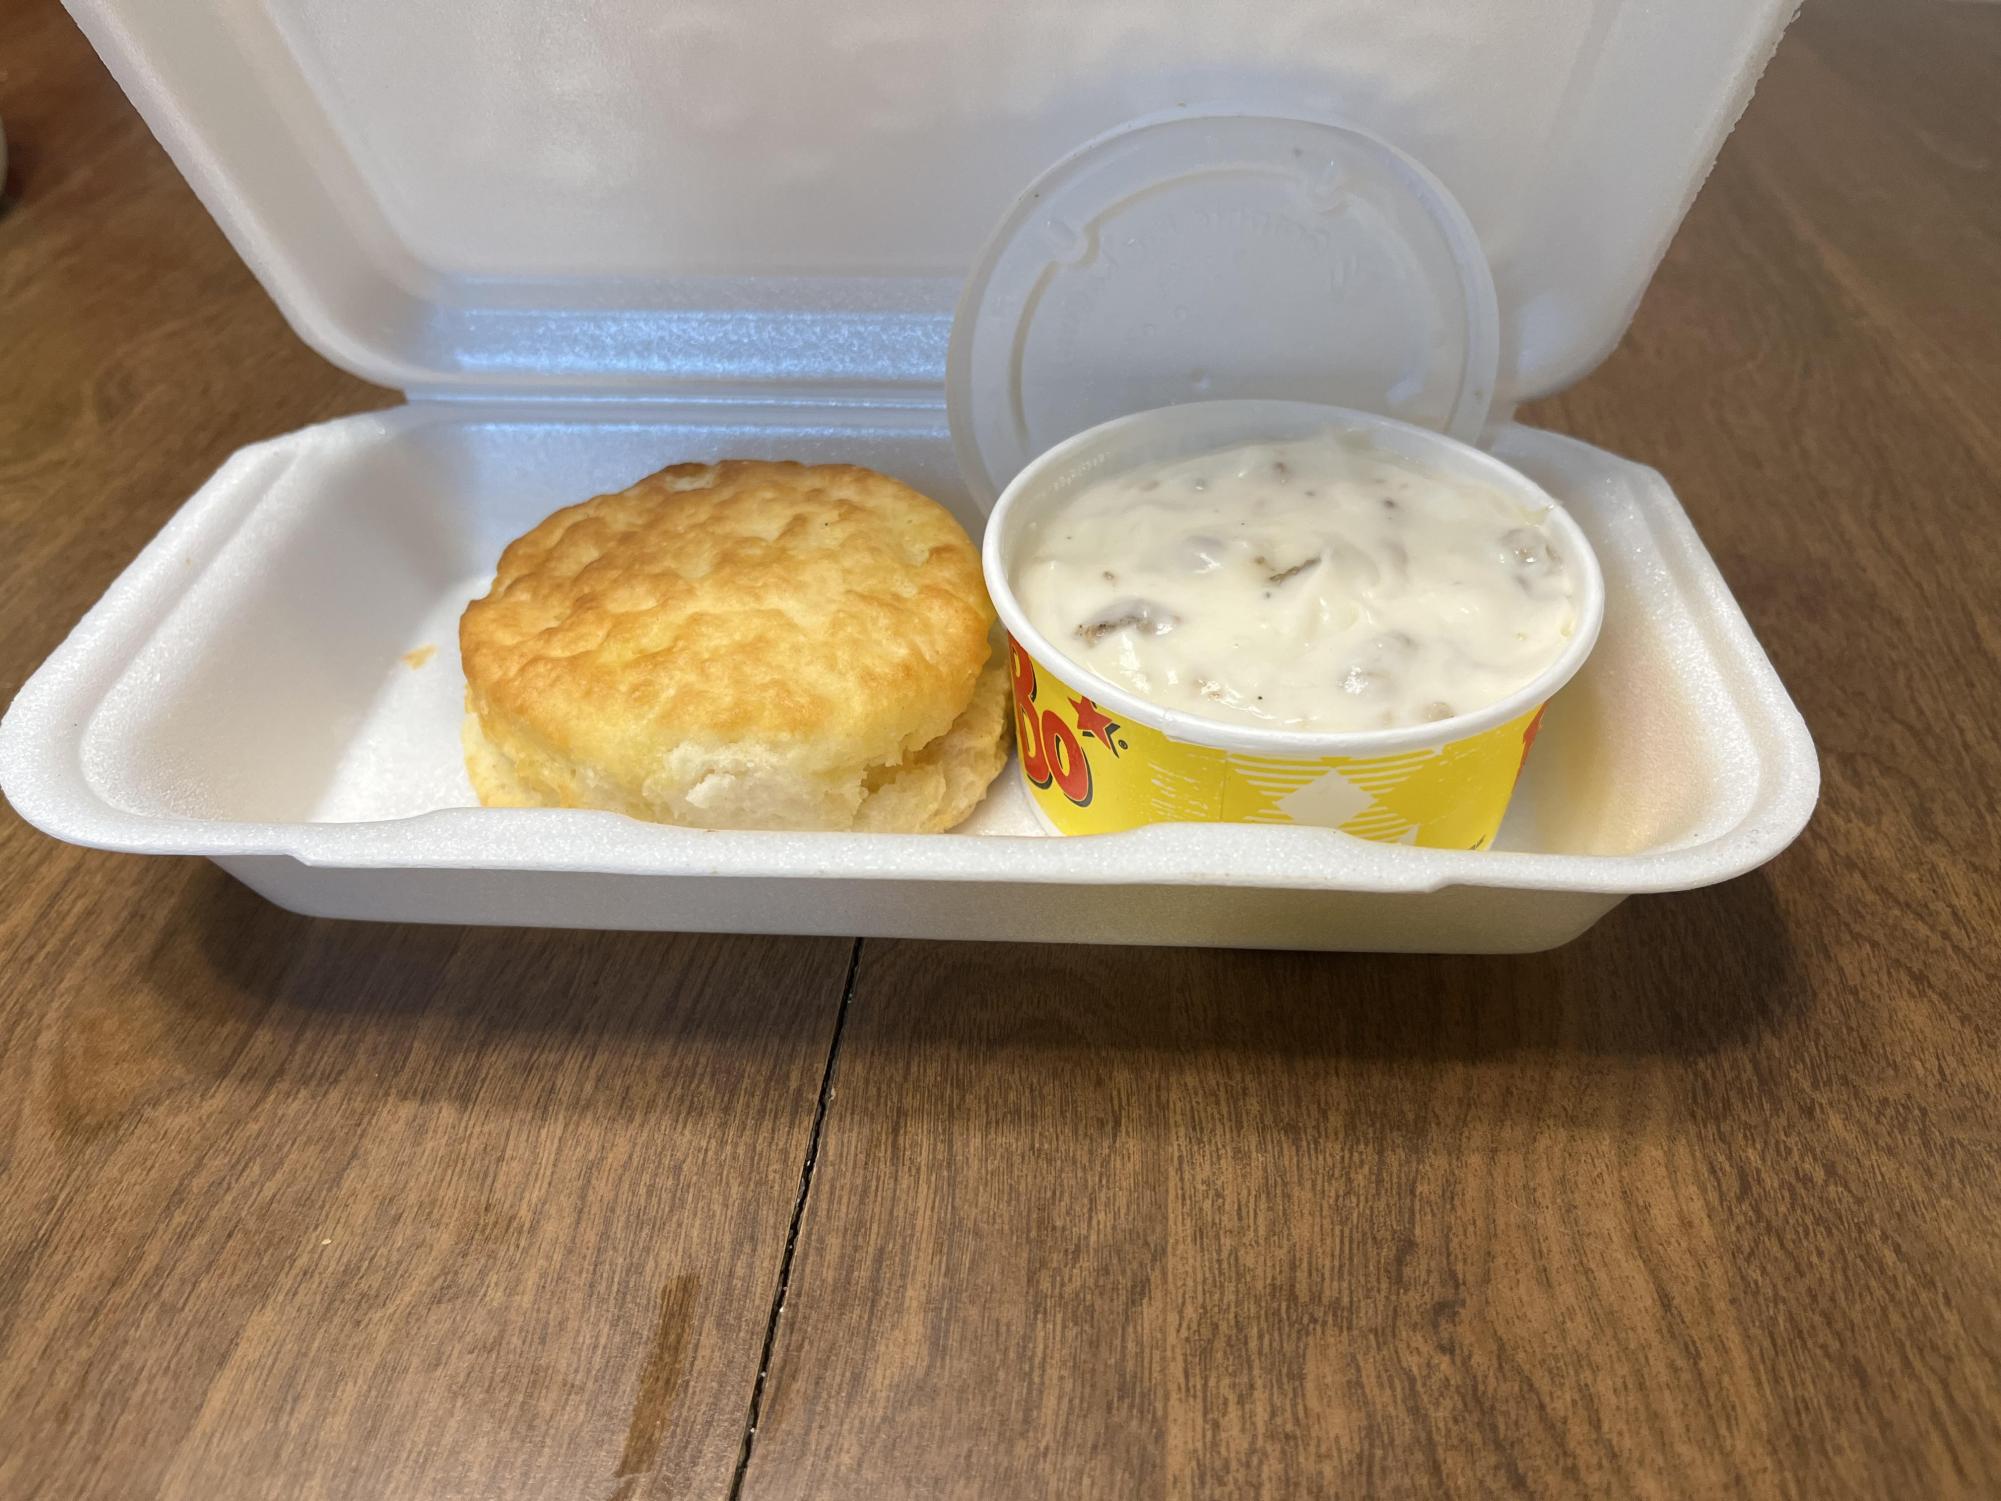 Biscuits and gravy: